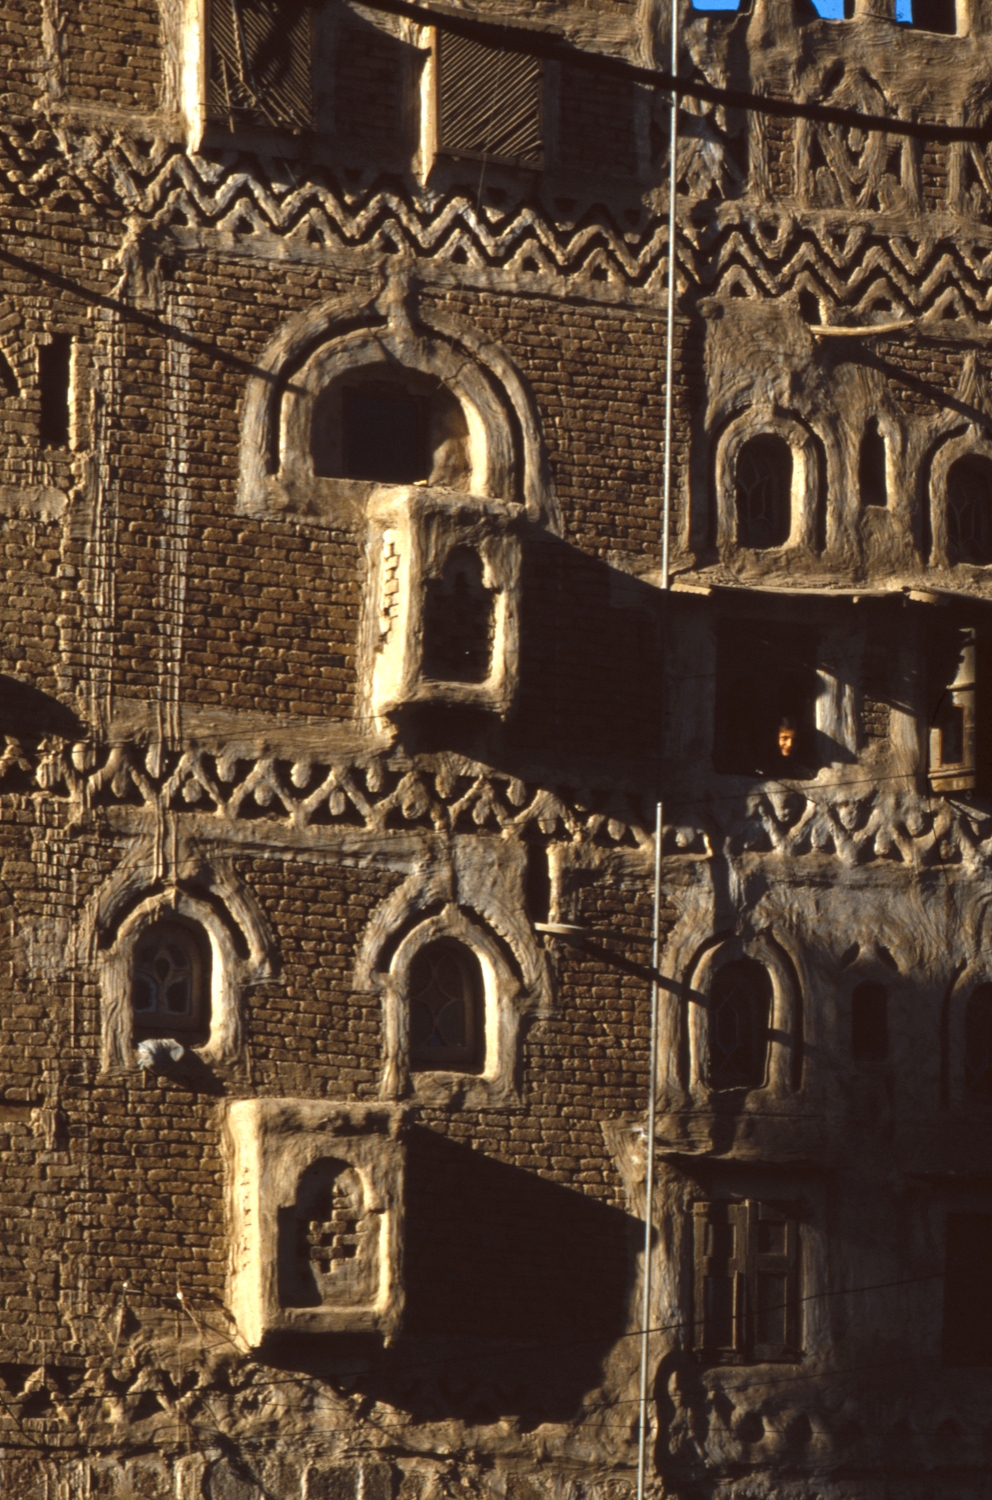 Sana'a. Depiction of a bricked building in Old Sana'a with ornamental bands of stucco work. 